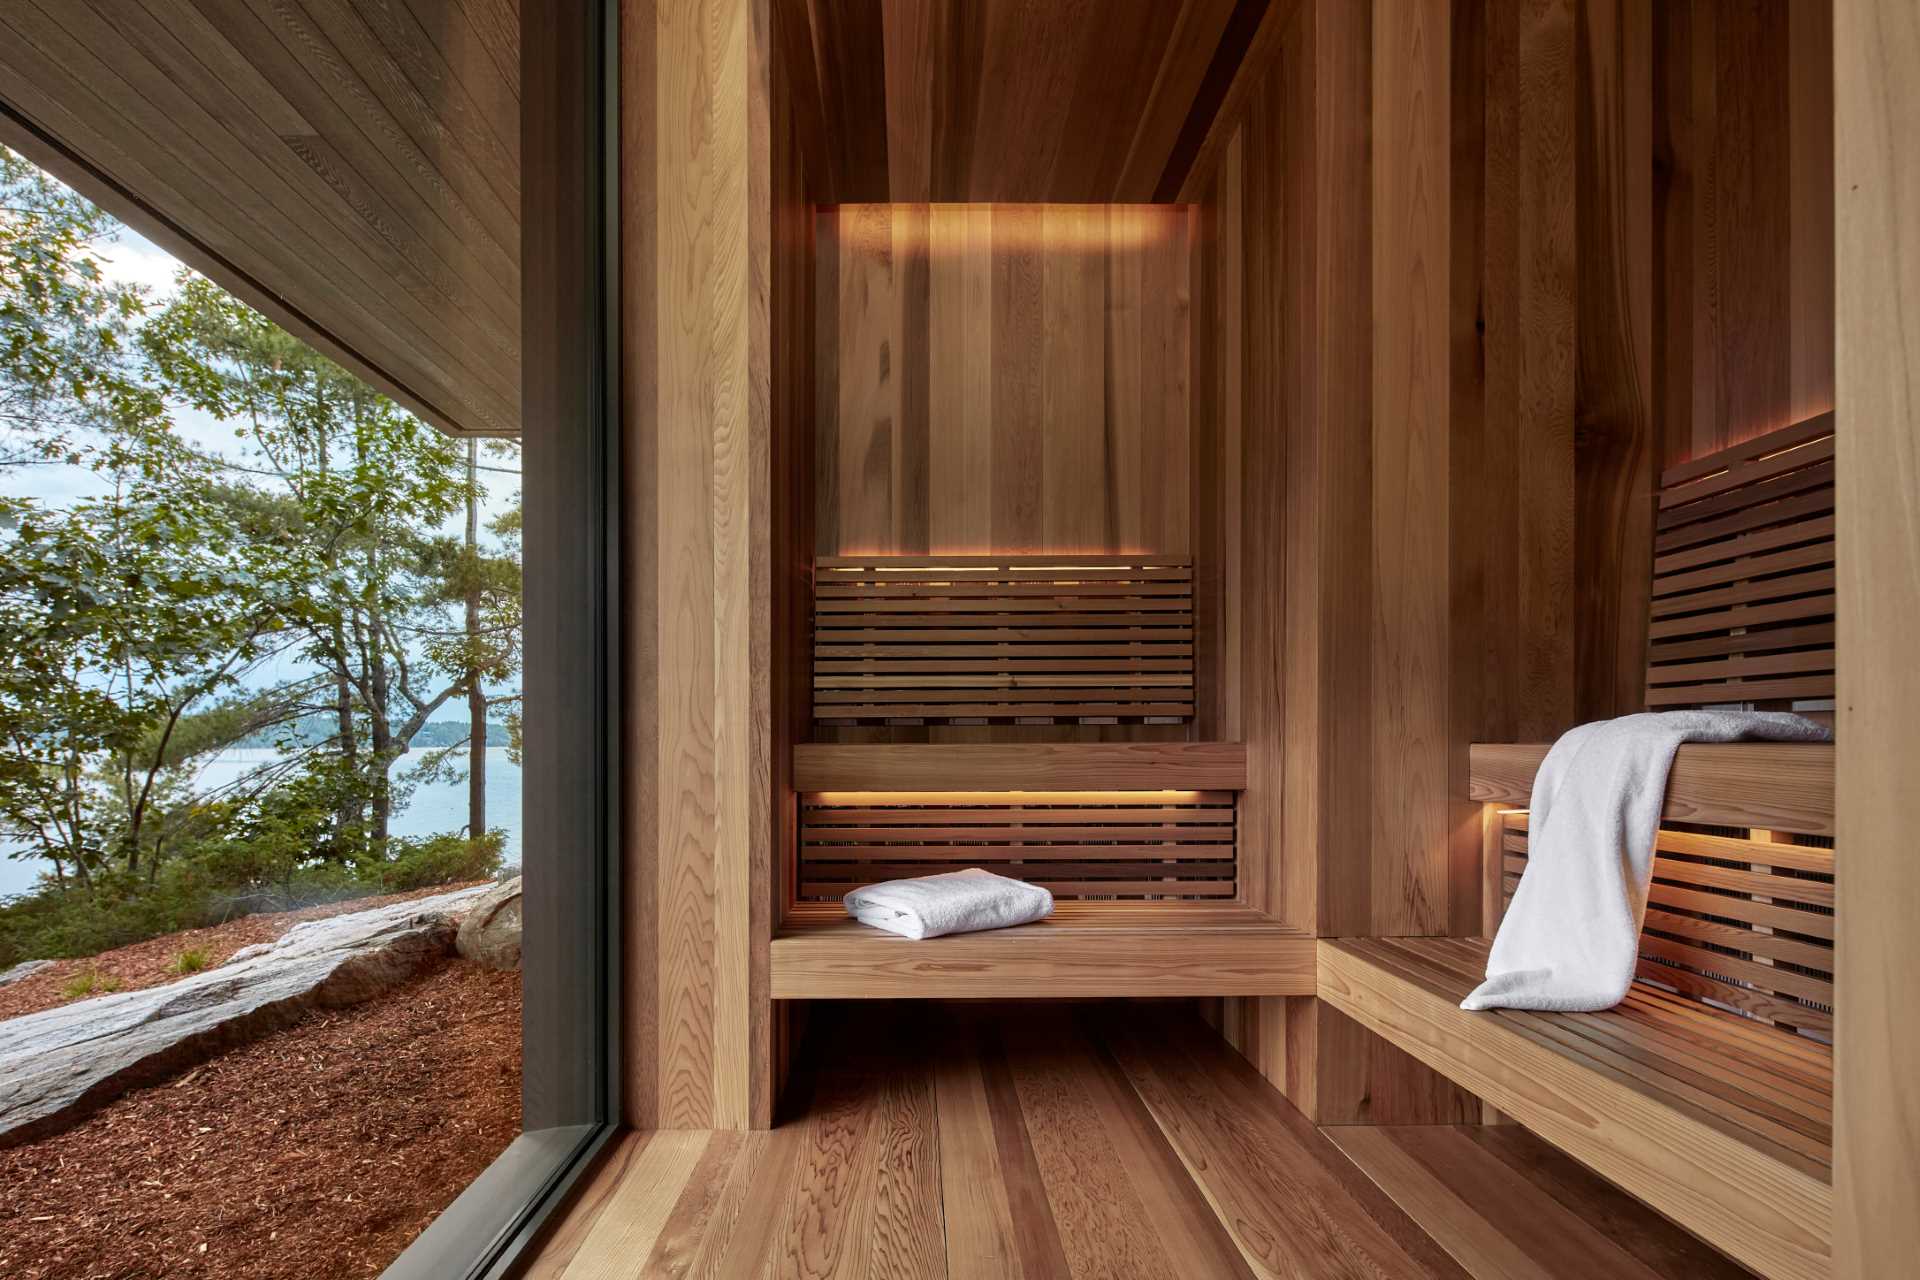 An infrared sauna located on the lower level is only steps away from the lakeshore.